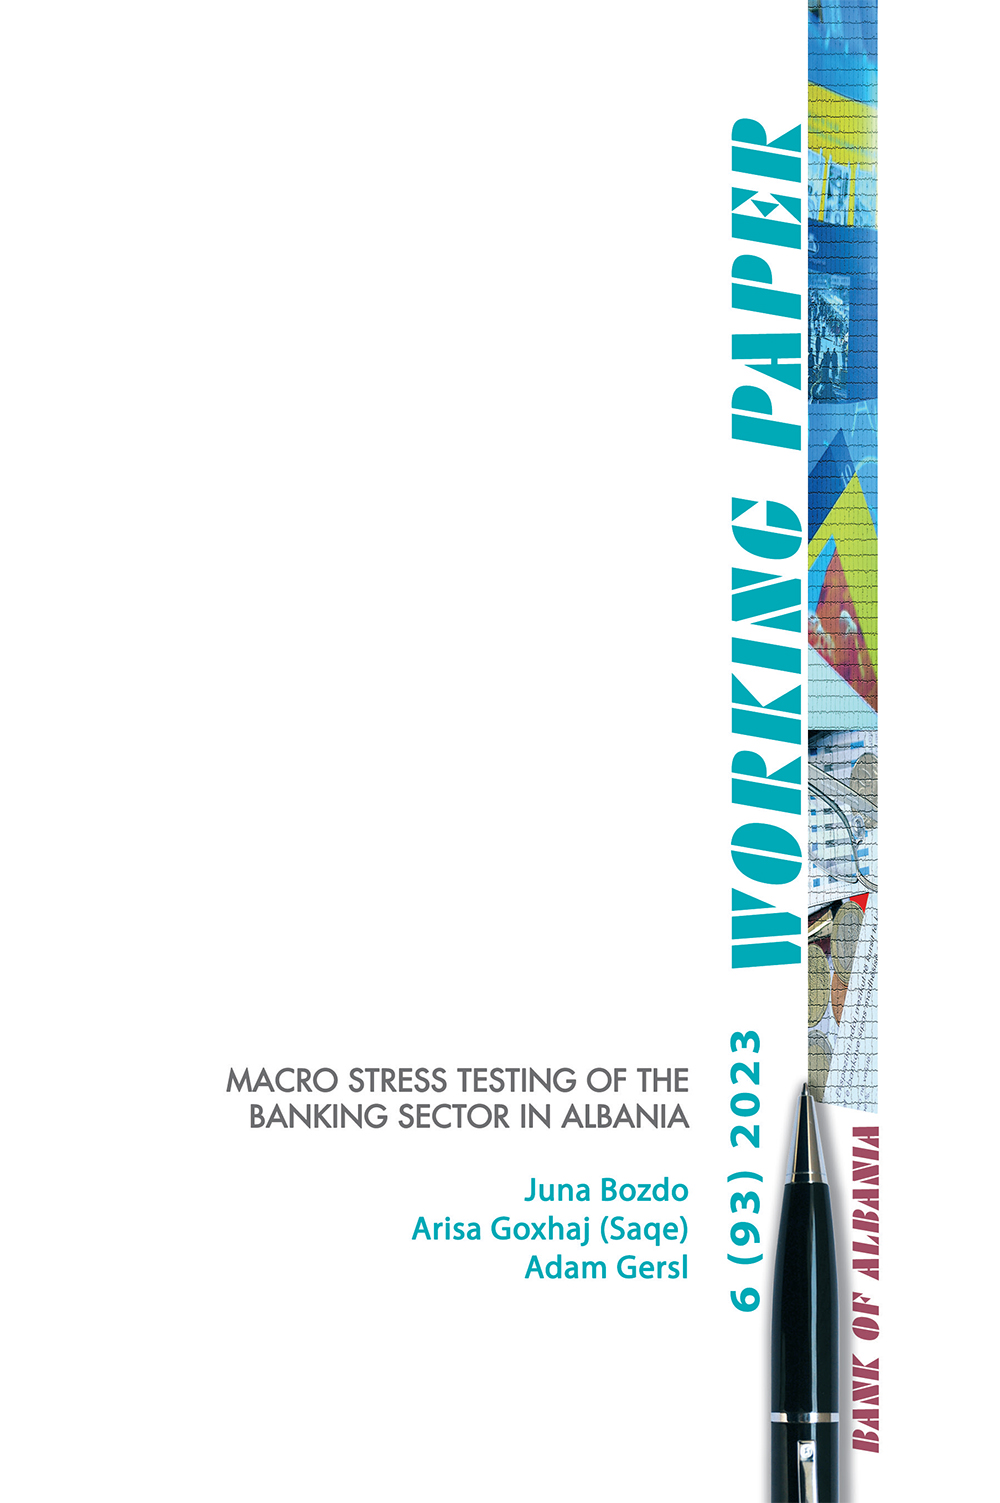 Macro Stress Testing of the Banking Sector in Albania